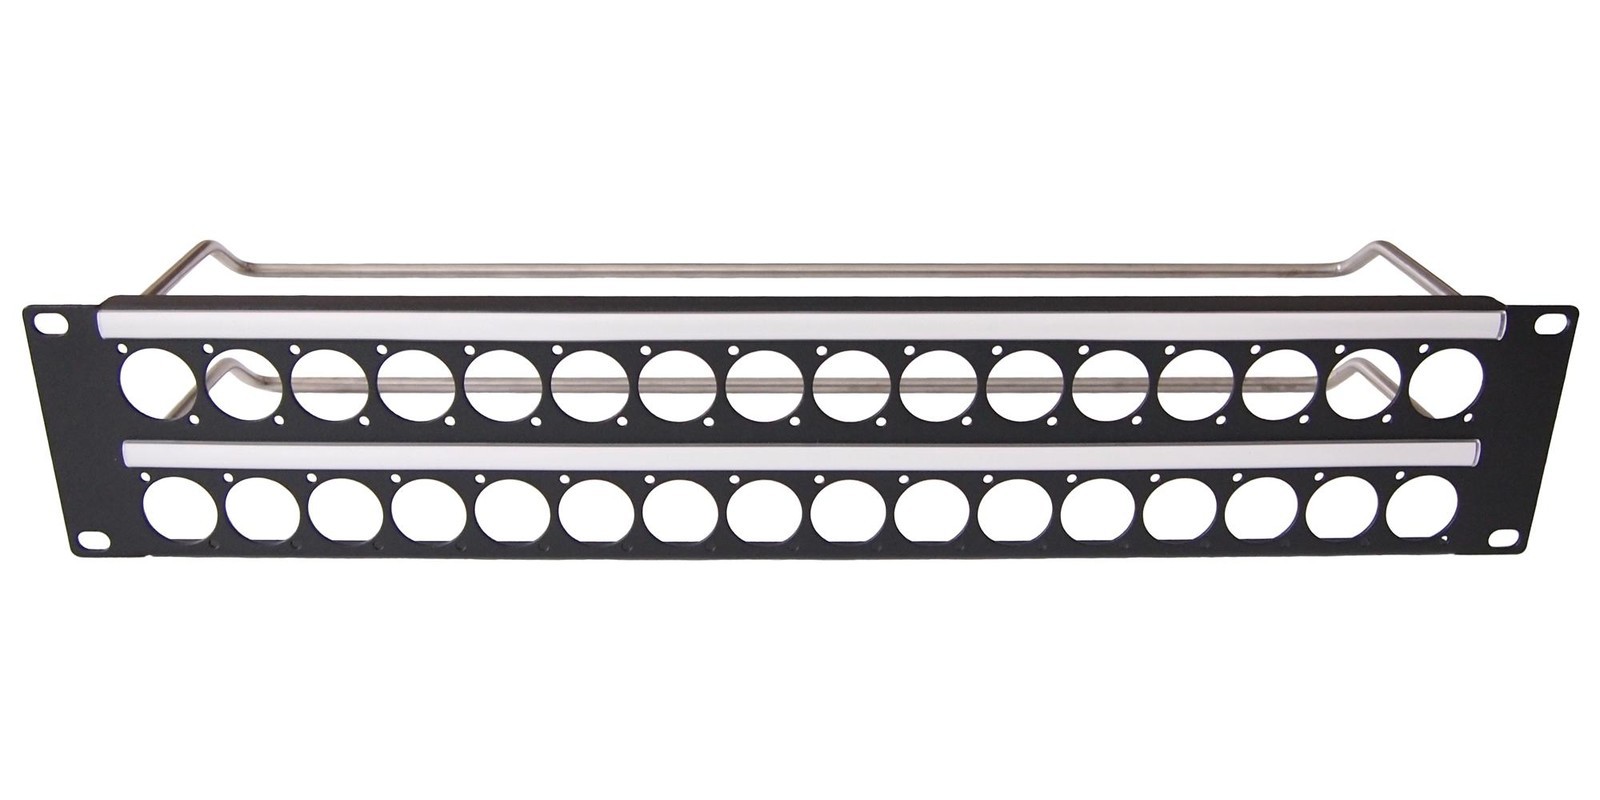 Cliff Electronic Components Cp30157 Patch Panel,w/ 4-40 Hole, 32Port, 2U